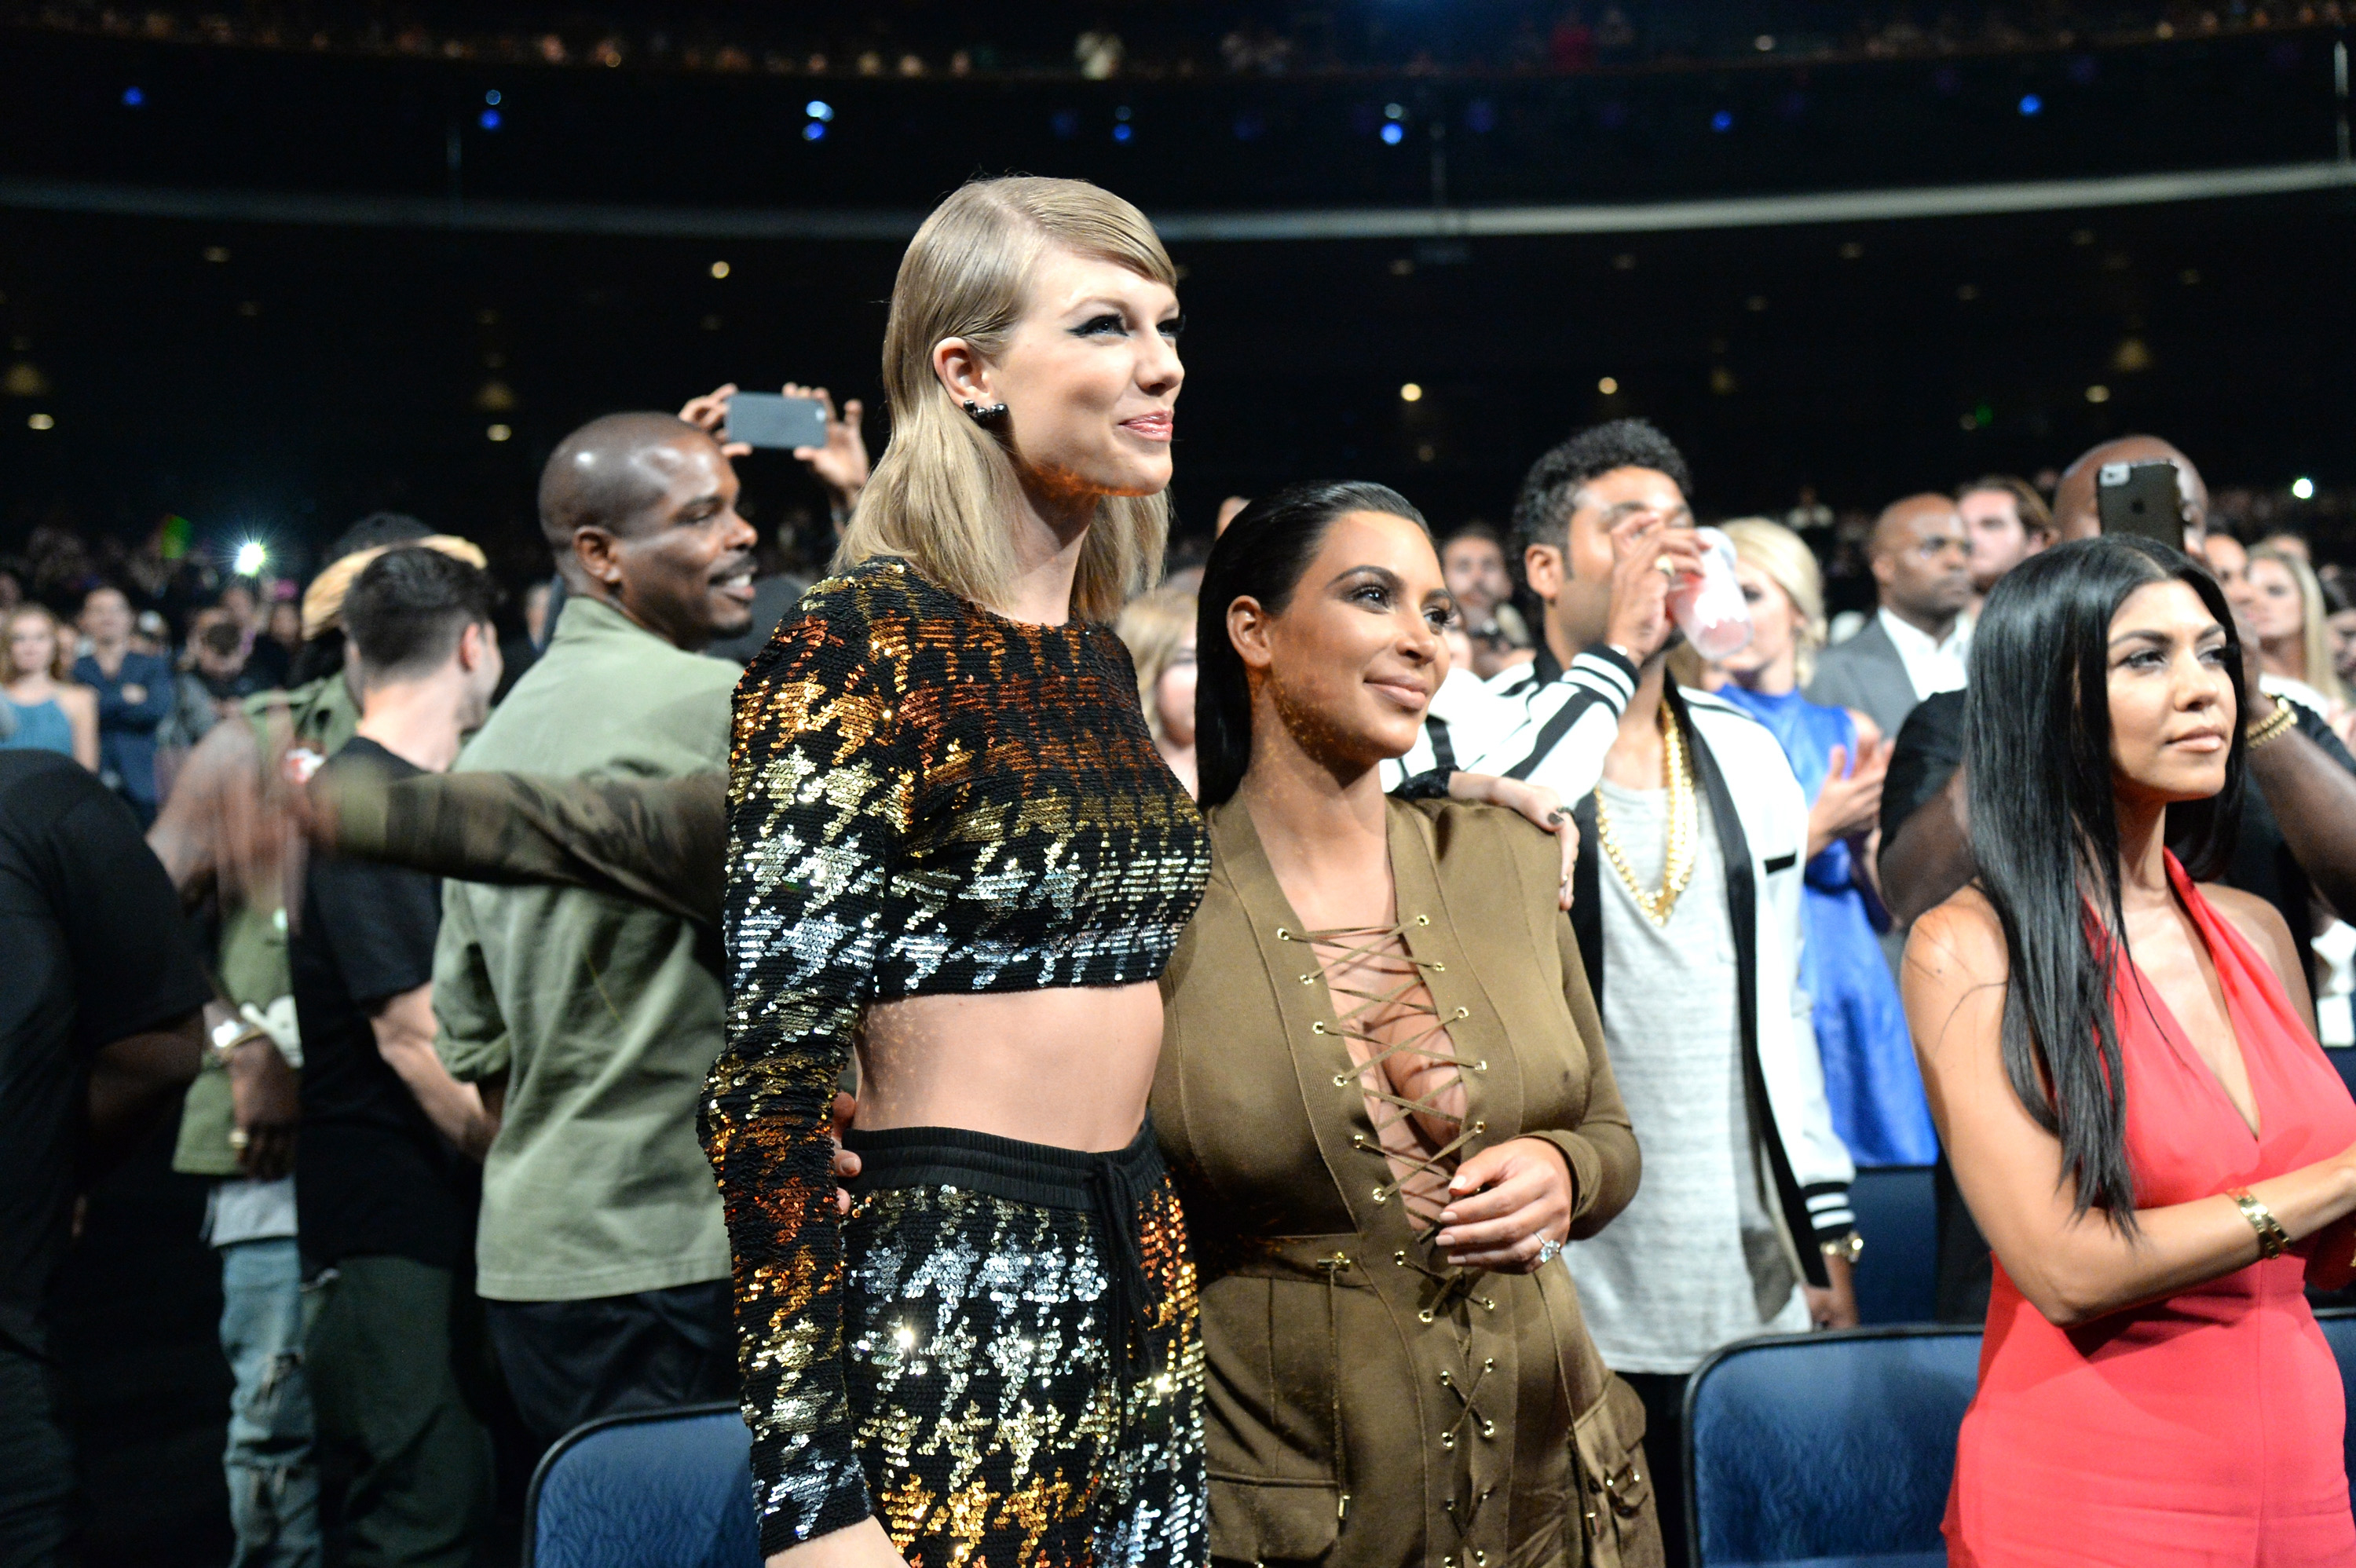 Taylor and Kim standing together enjoying a performance